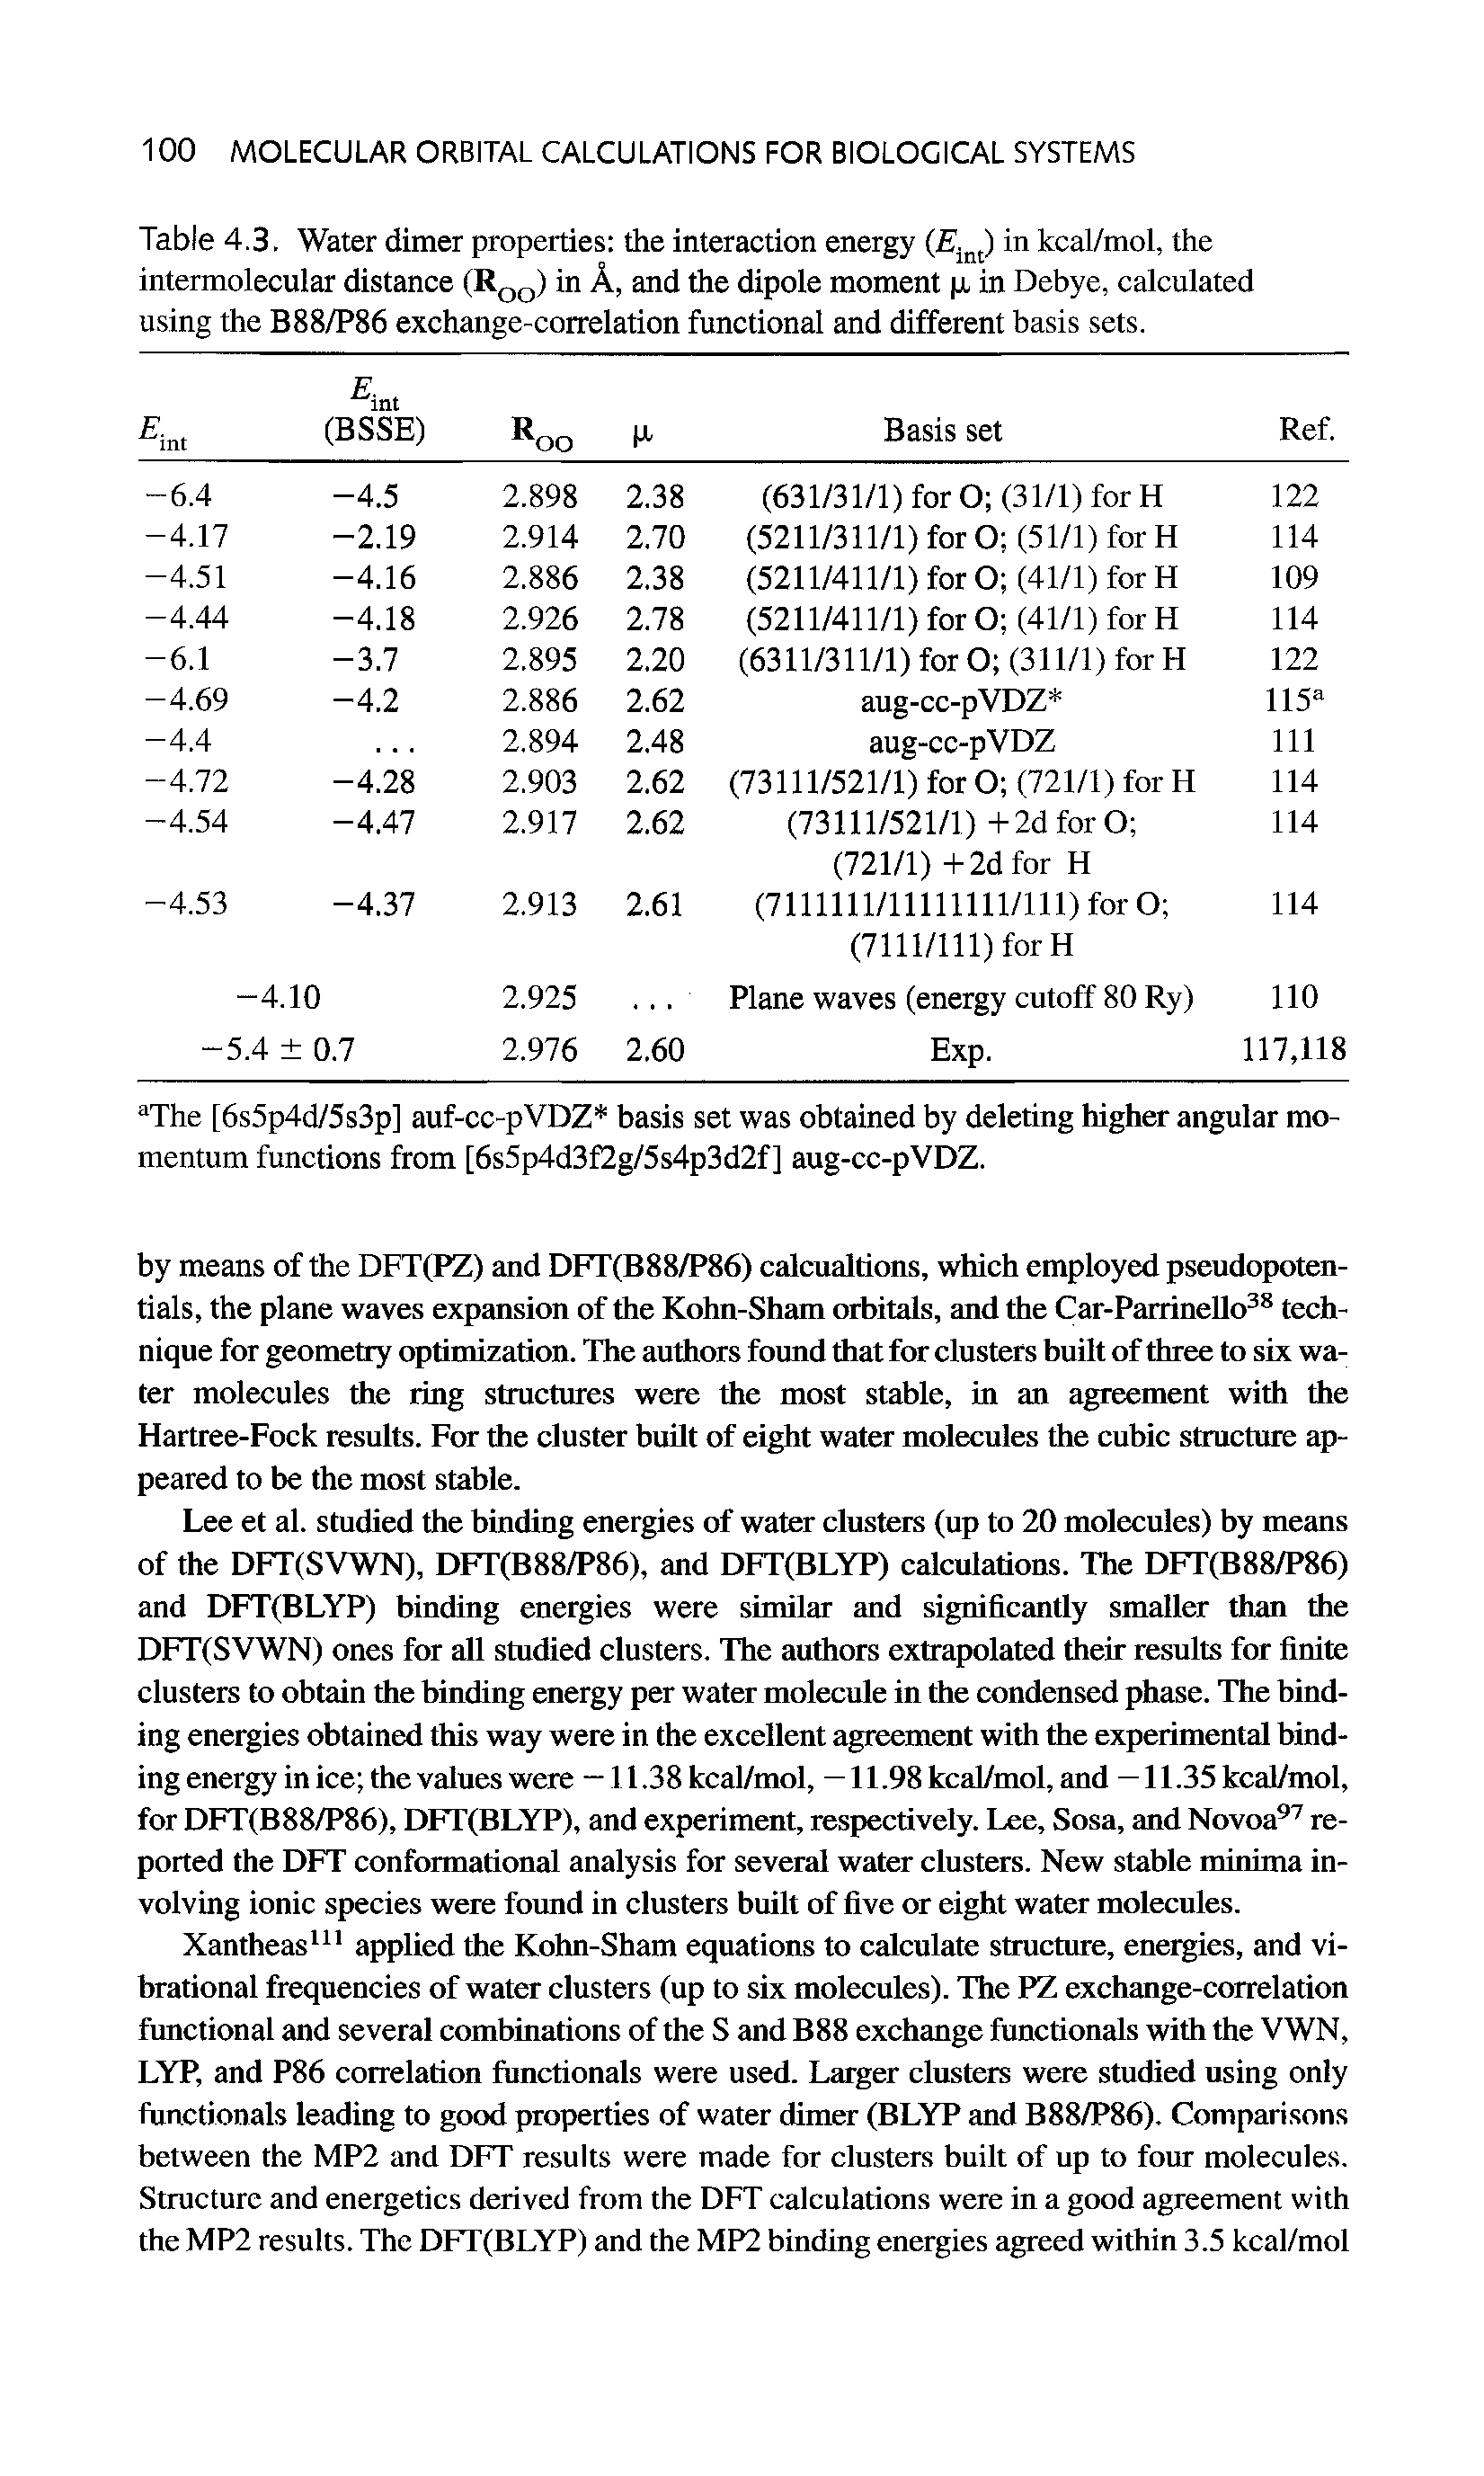 Table 4.3. Water dimer properties the interaction energy (Ei t) in kcal/mol, the intermolecular distance (R00) in A, and the dipole moment p. in Debye, calculated using the B88/P86 exchange-correlation functional and different basis sets.